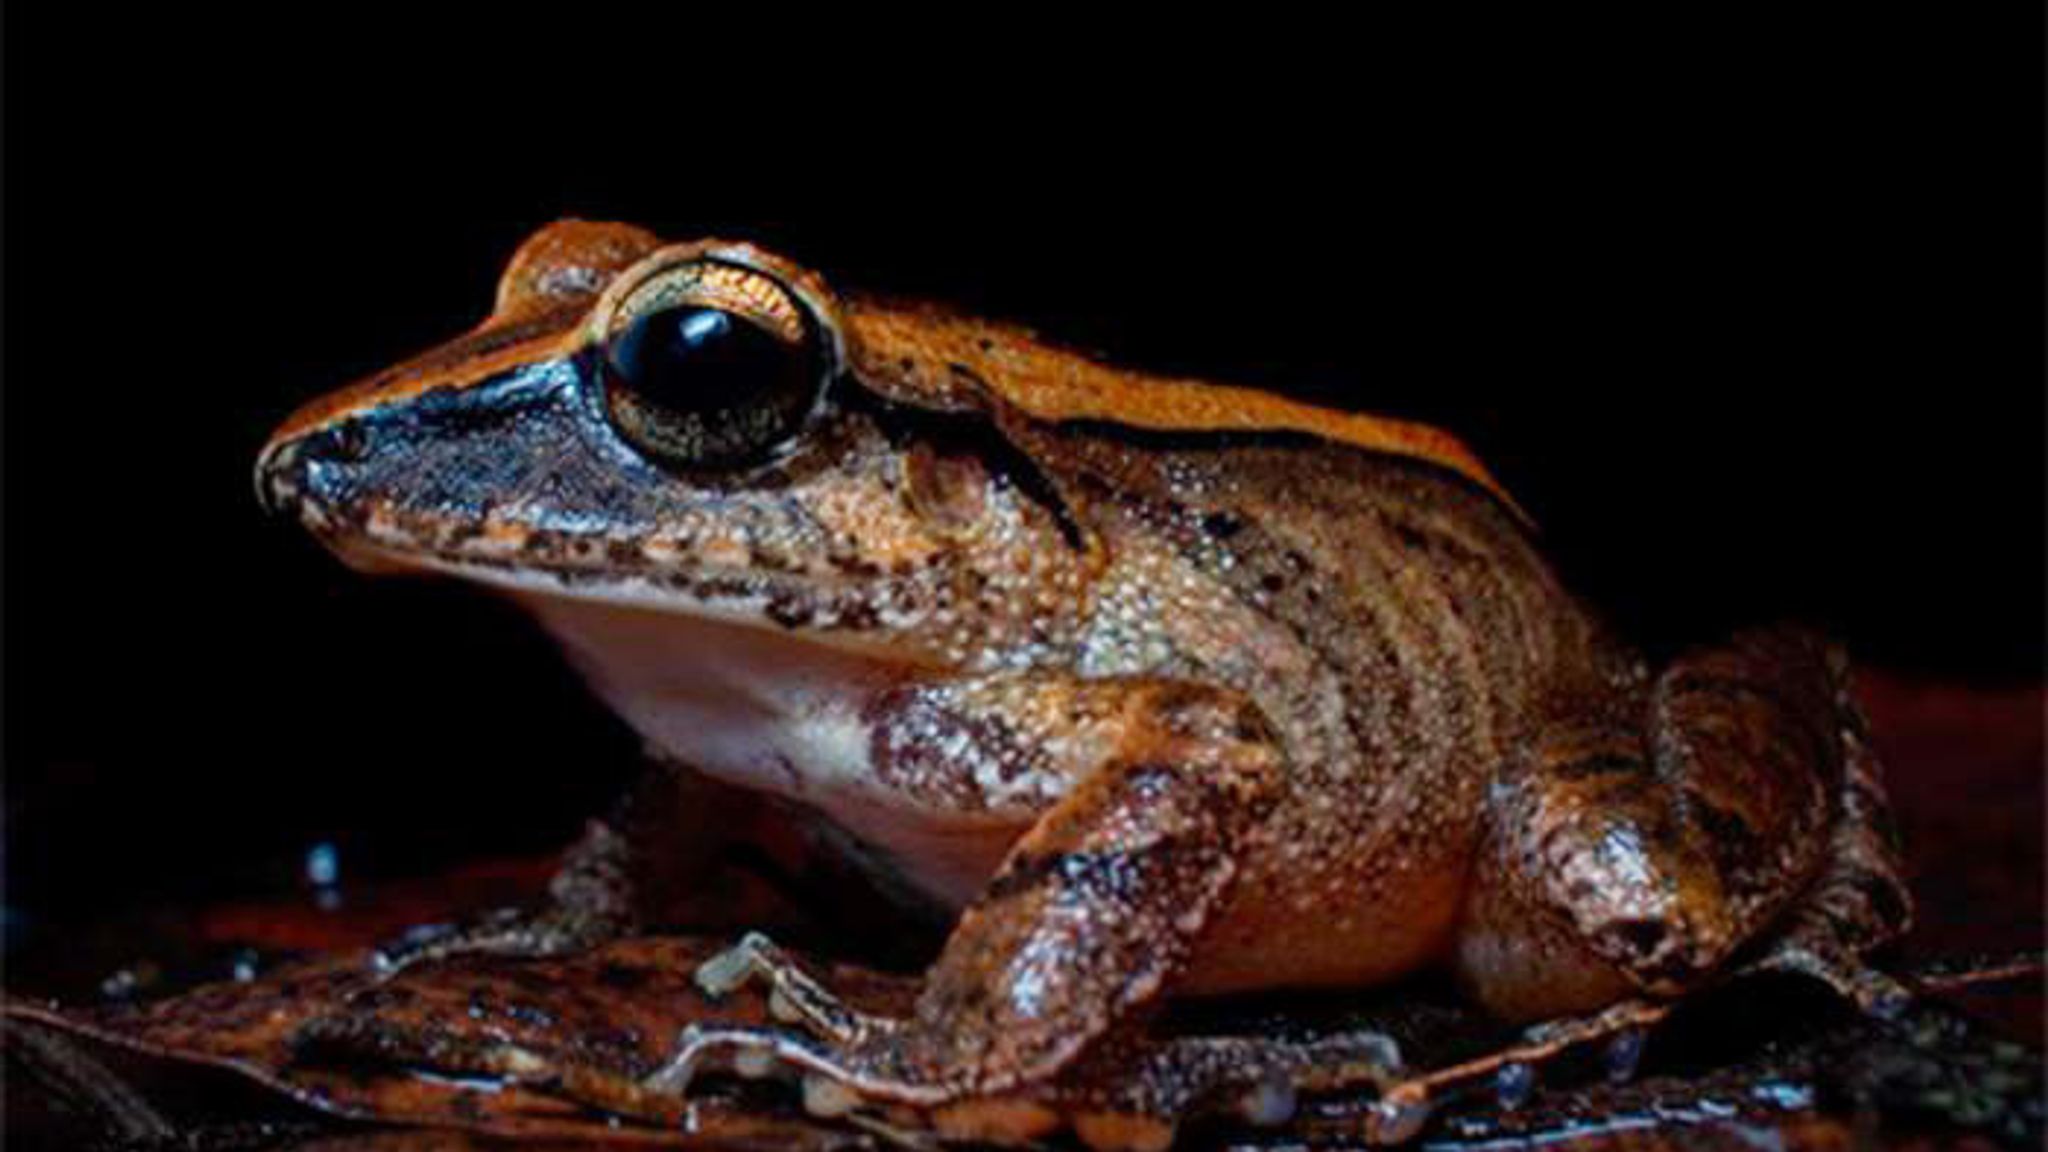 Frogs are screaming - we just can't hear them, scientists in